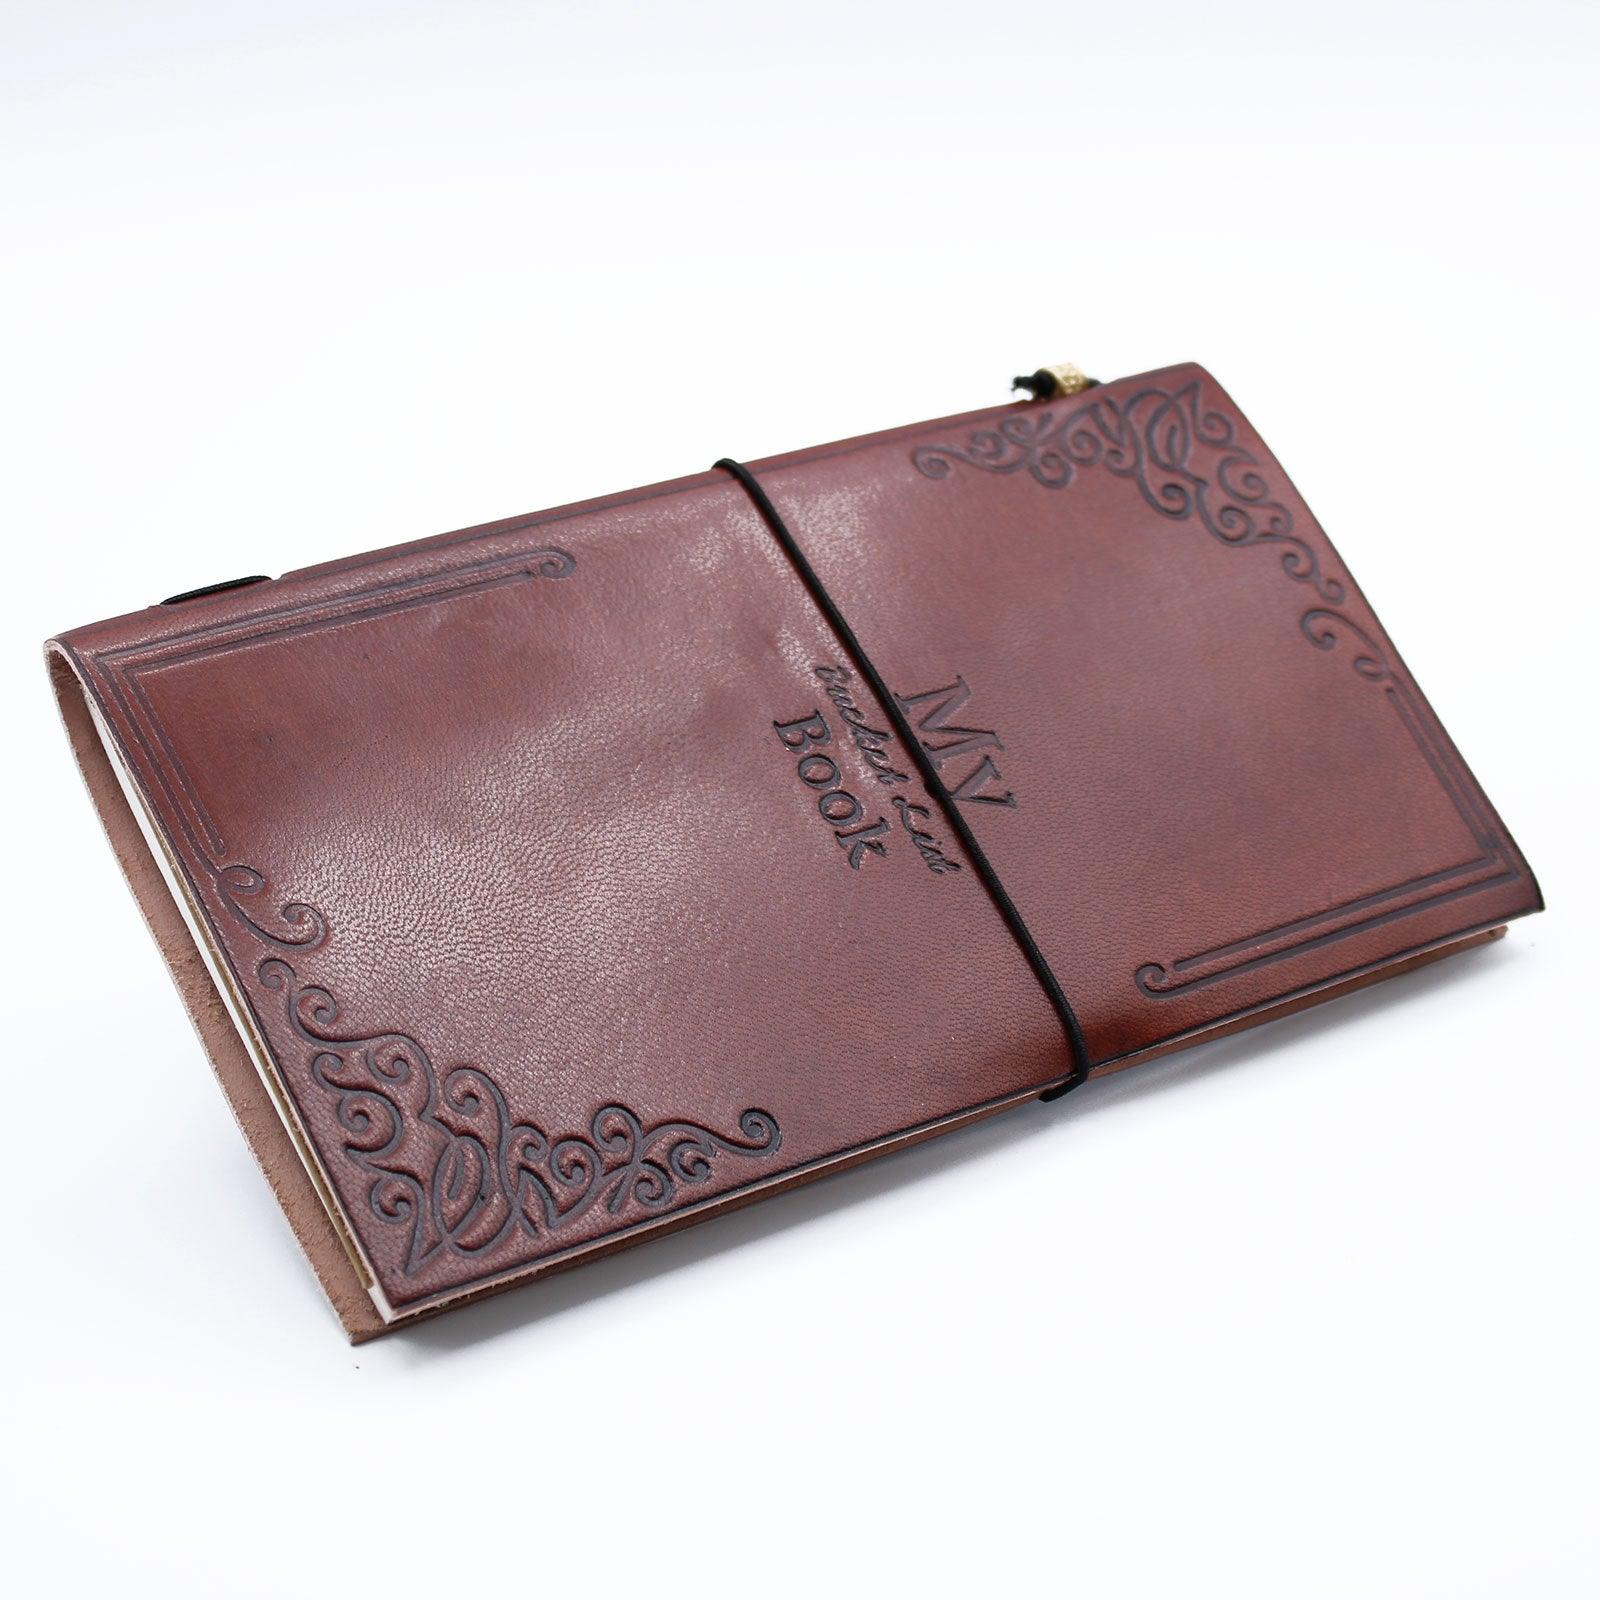 Handmade Leather Journal - My Bucket List Book - Brown (80 pages) - DuvetDay.co.uk